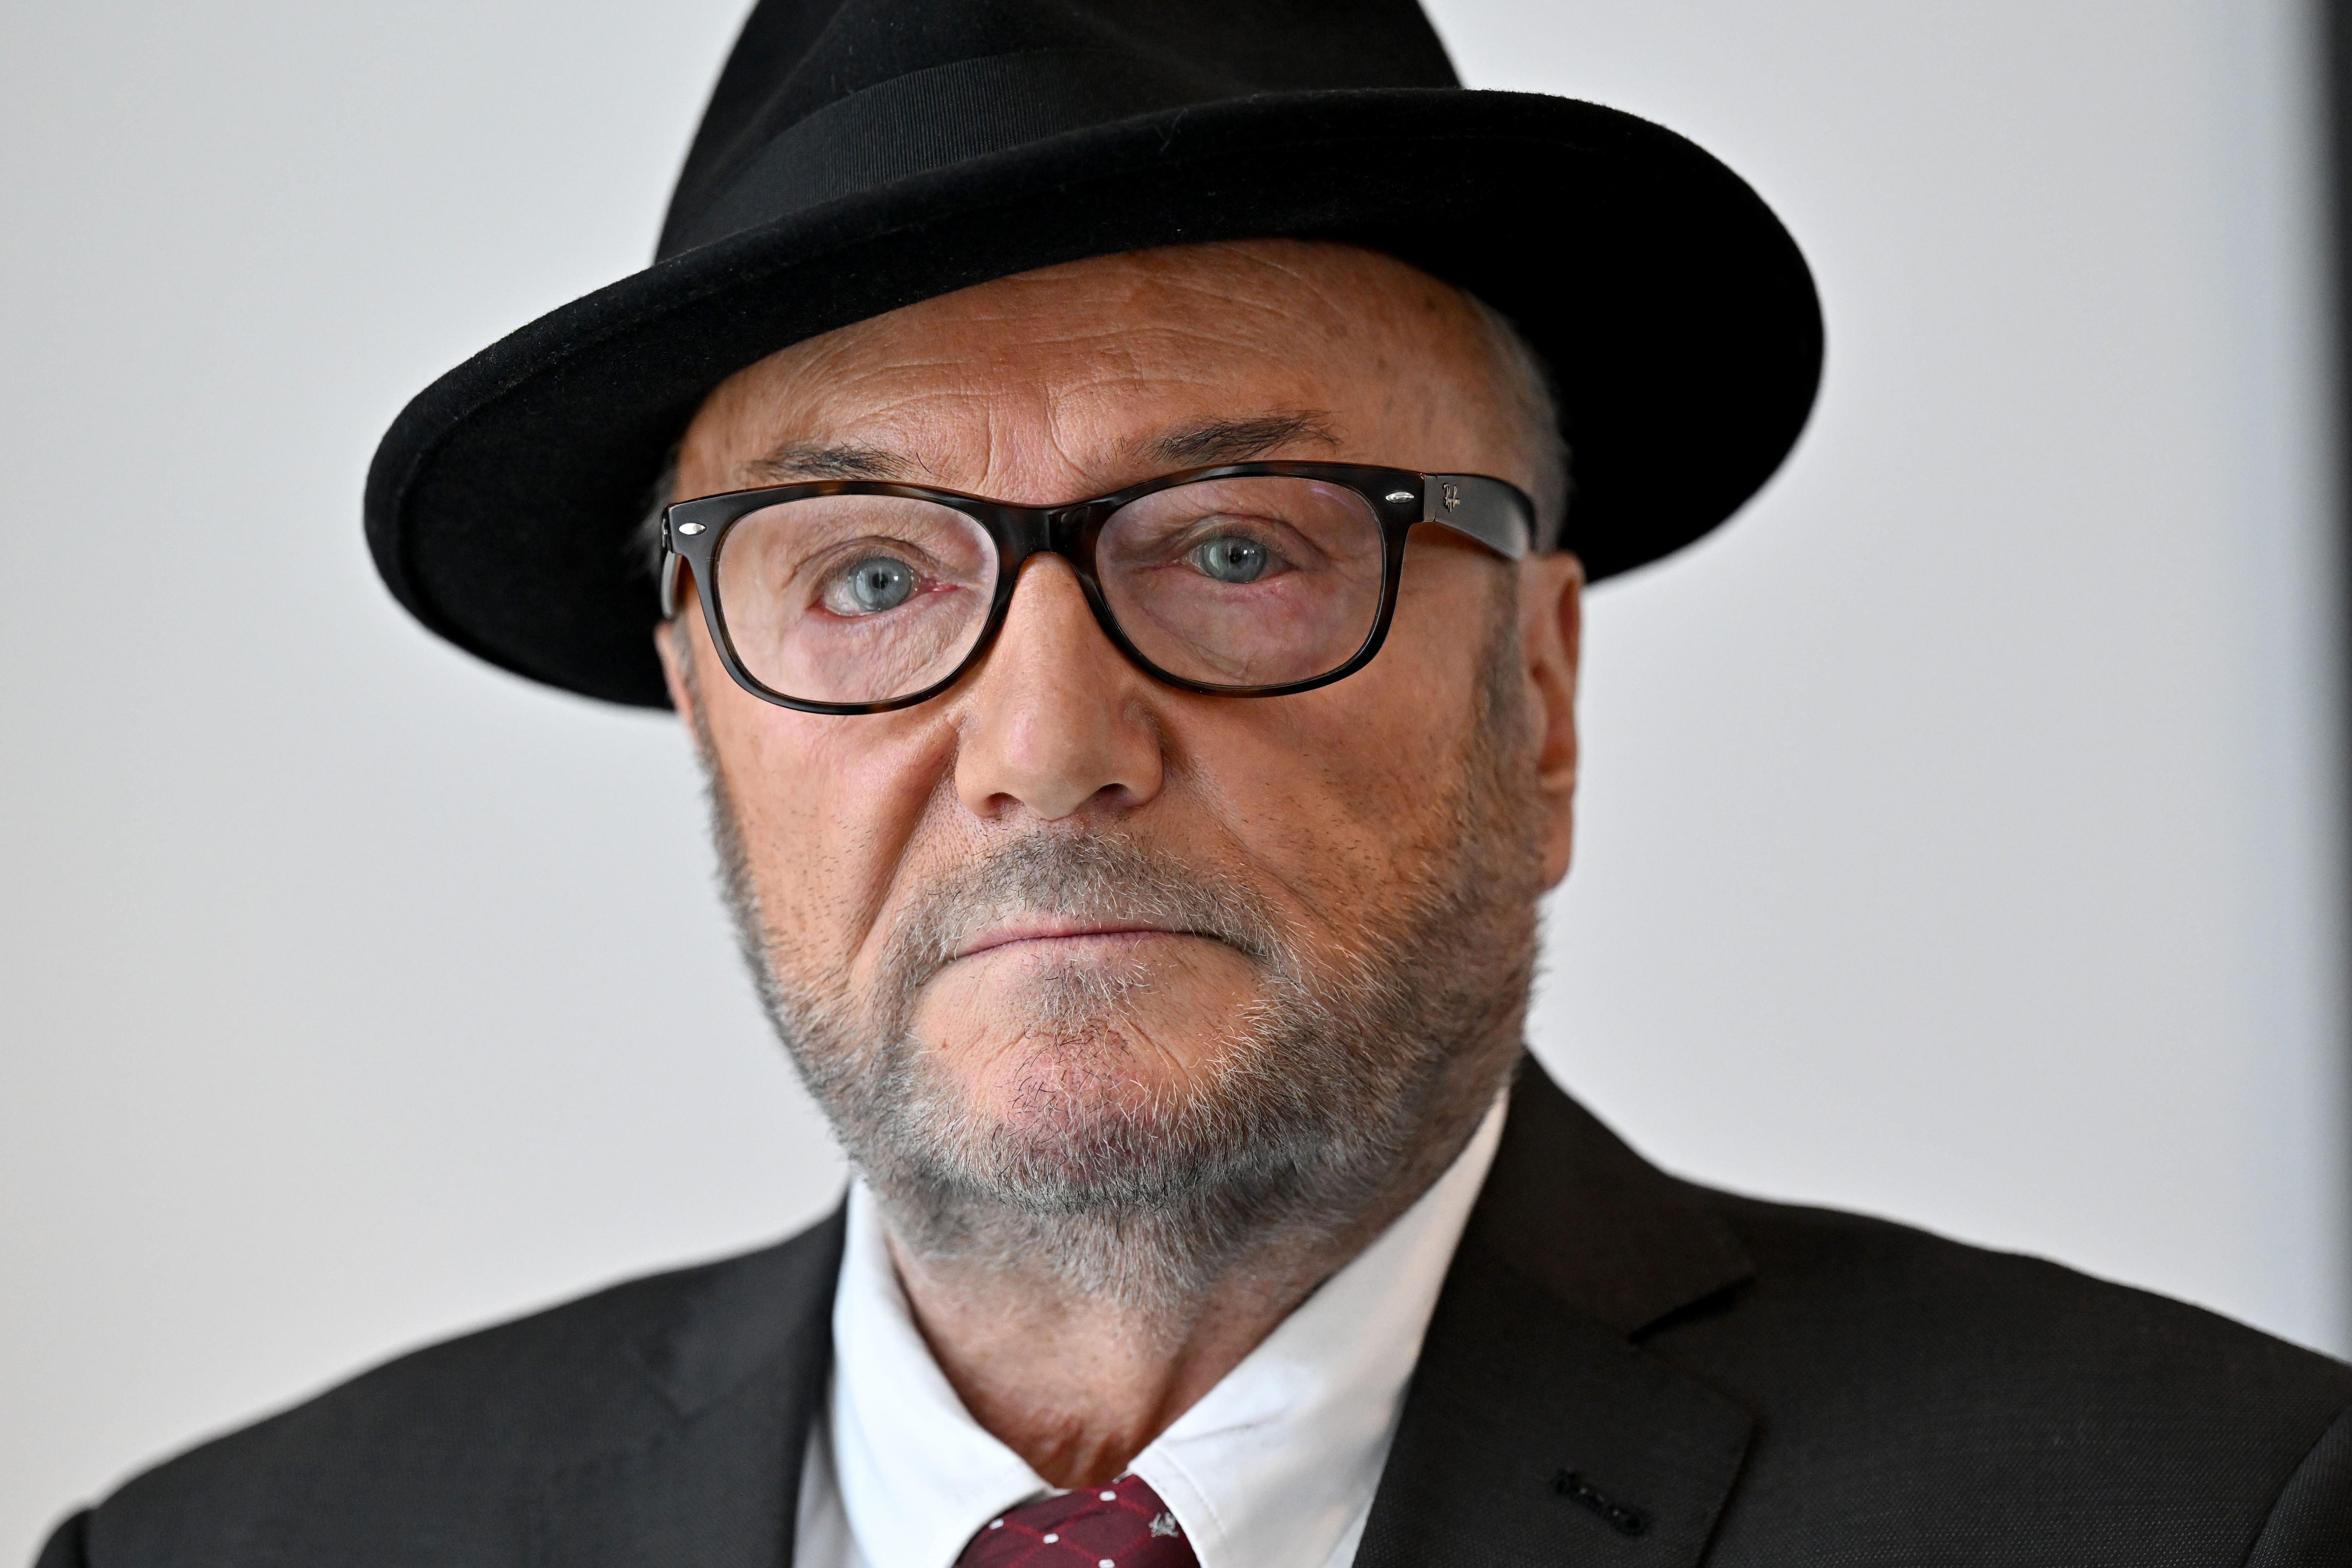 George Galloway accepted donations totalling £5,000 from Tristan Tate